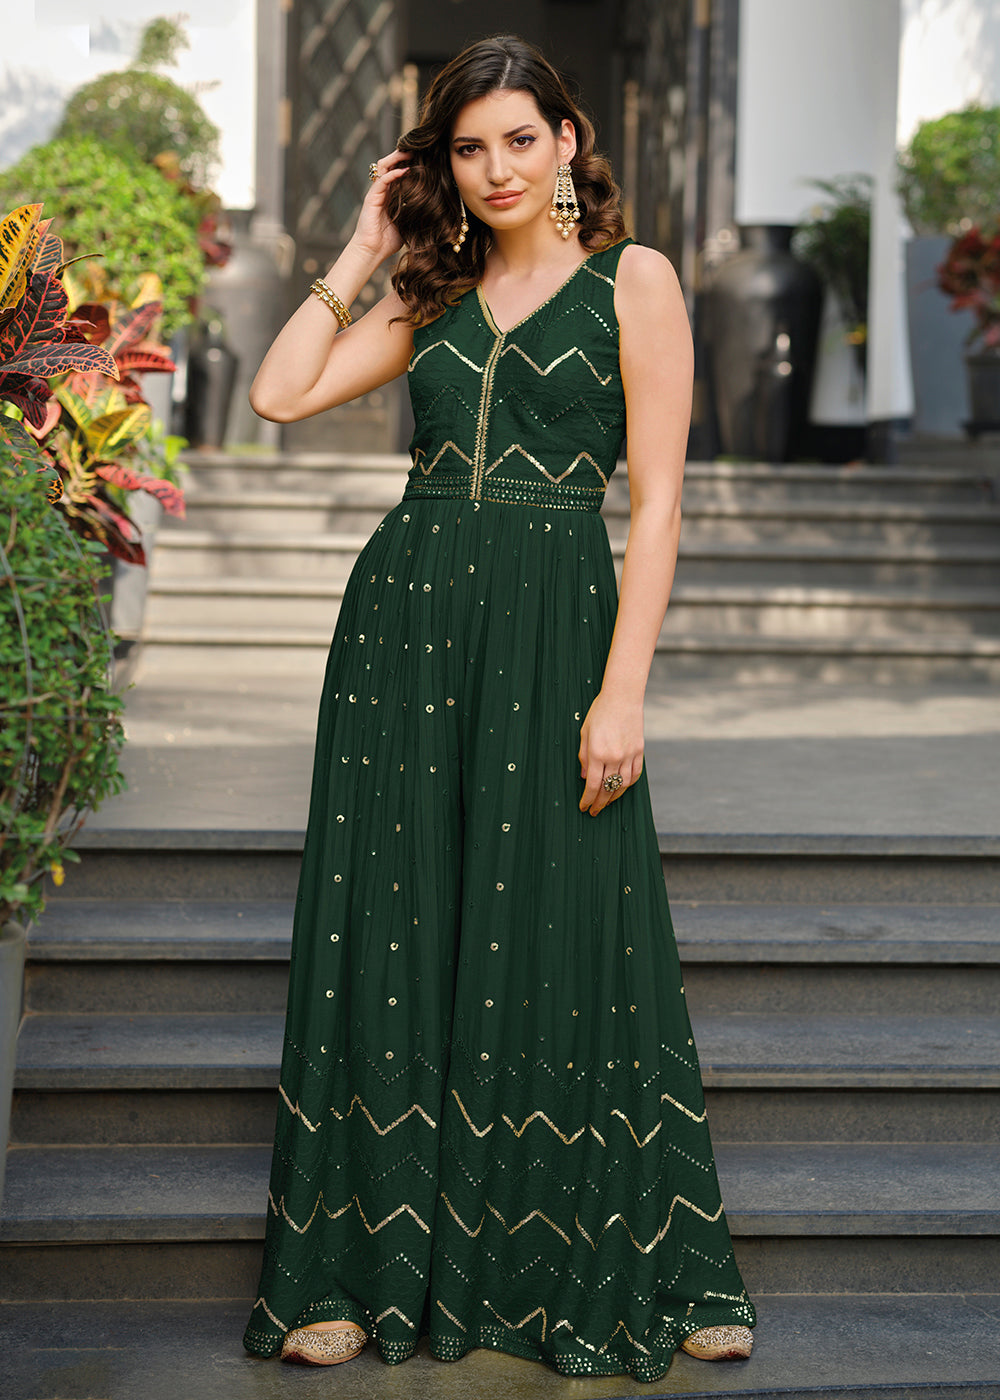 Buy Now Green Indo-Western Embroidered Jumpsuit Online in USA, UK, Canada, Germany & Worldwide at Empress Clothing. 